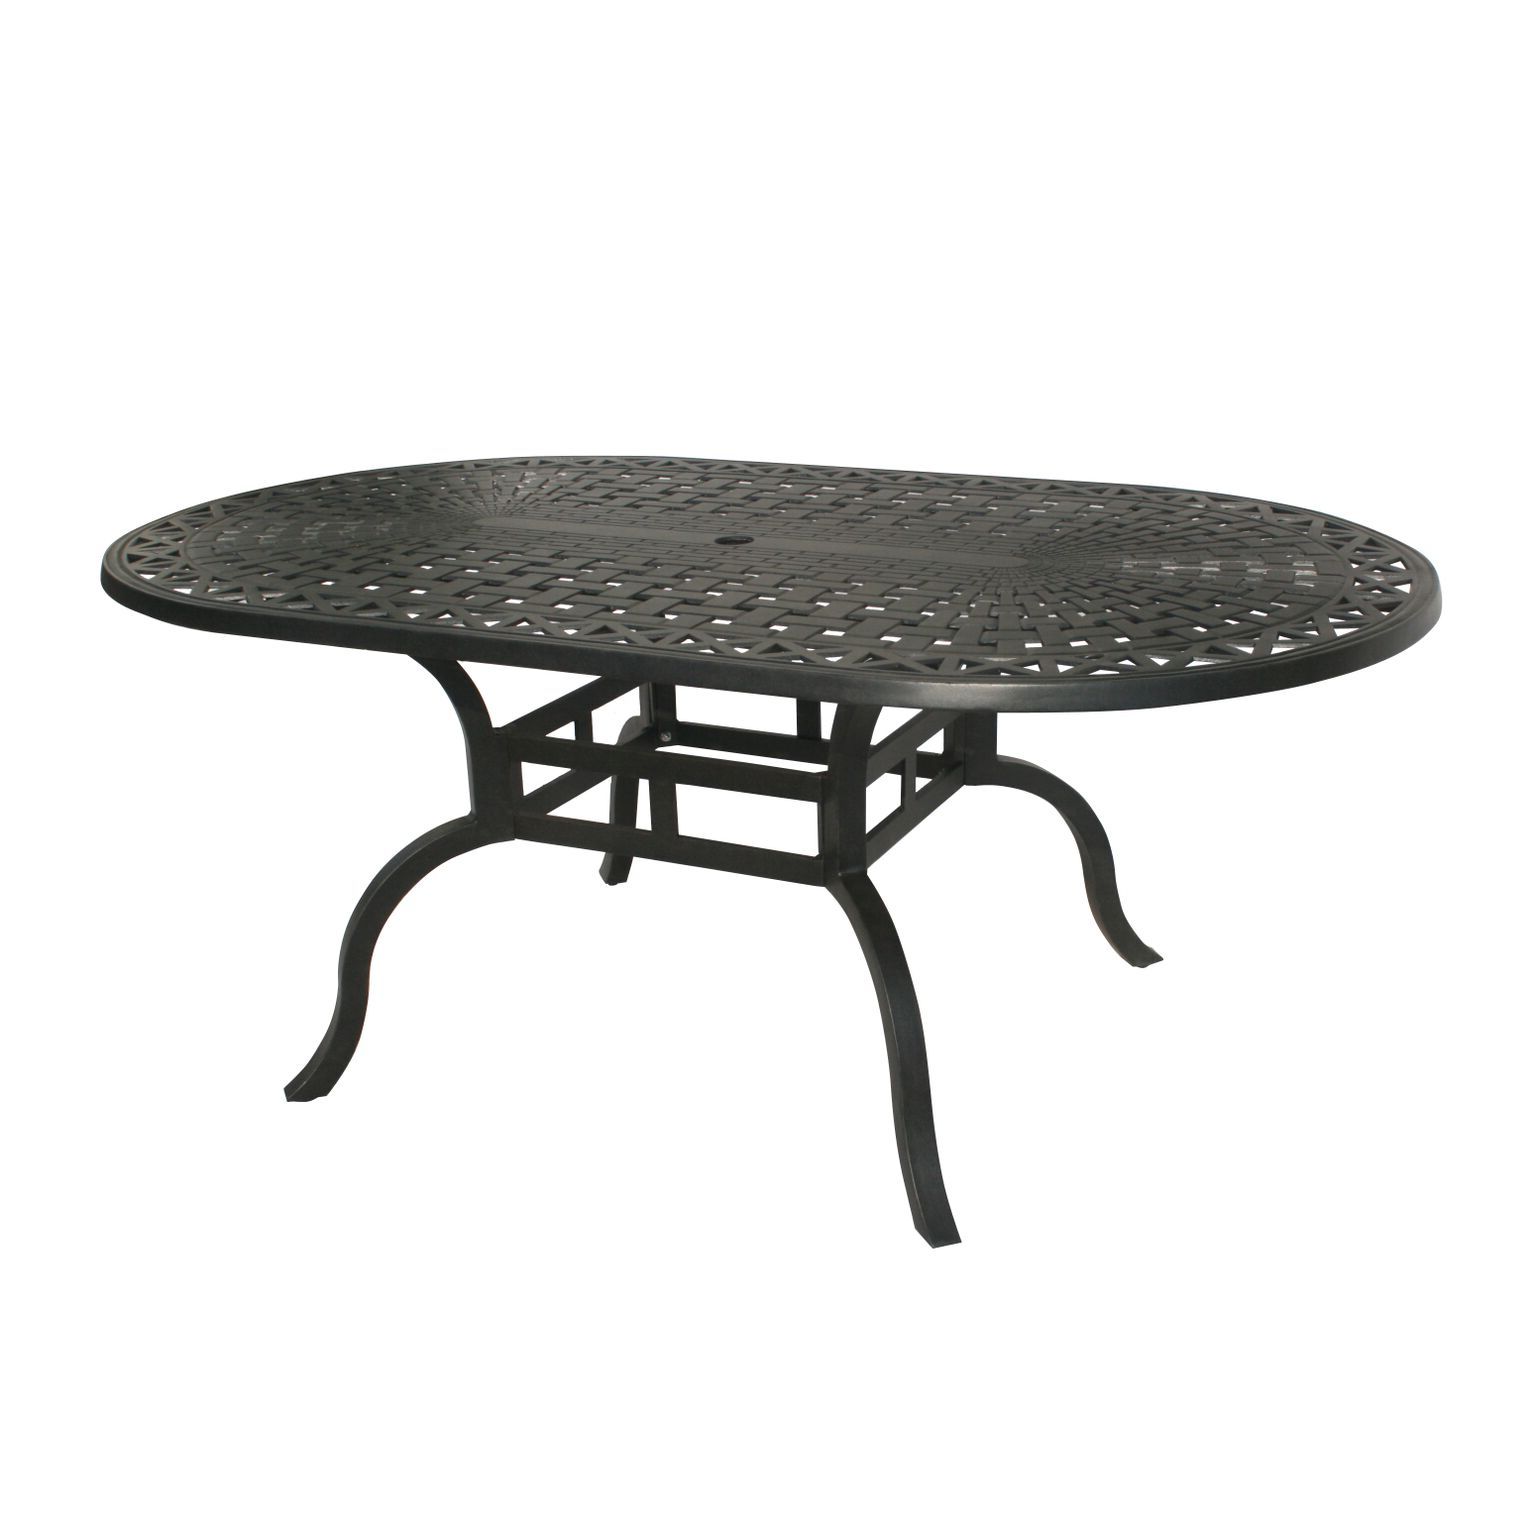 Widely Used 72" Jet Black Motif Oval Outdoor Patio Dining Table – Walmart Regarding Metal Oval Outdoor Tables (View 6 of 15)